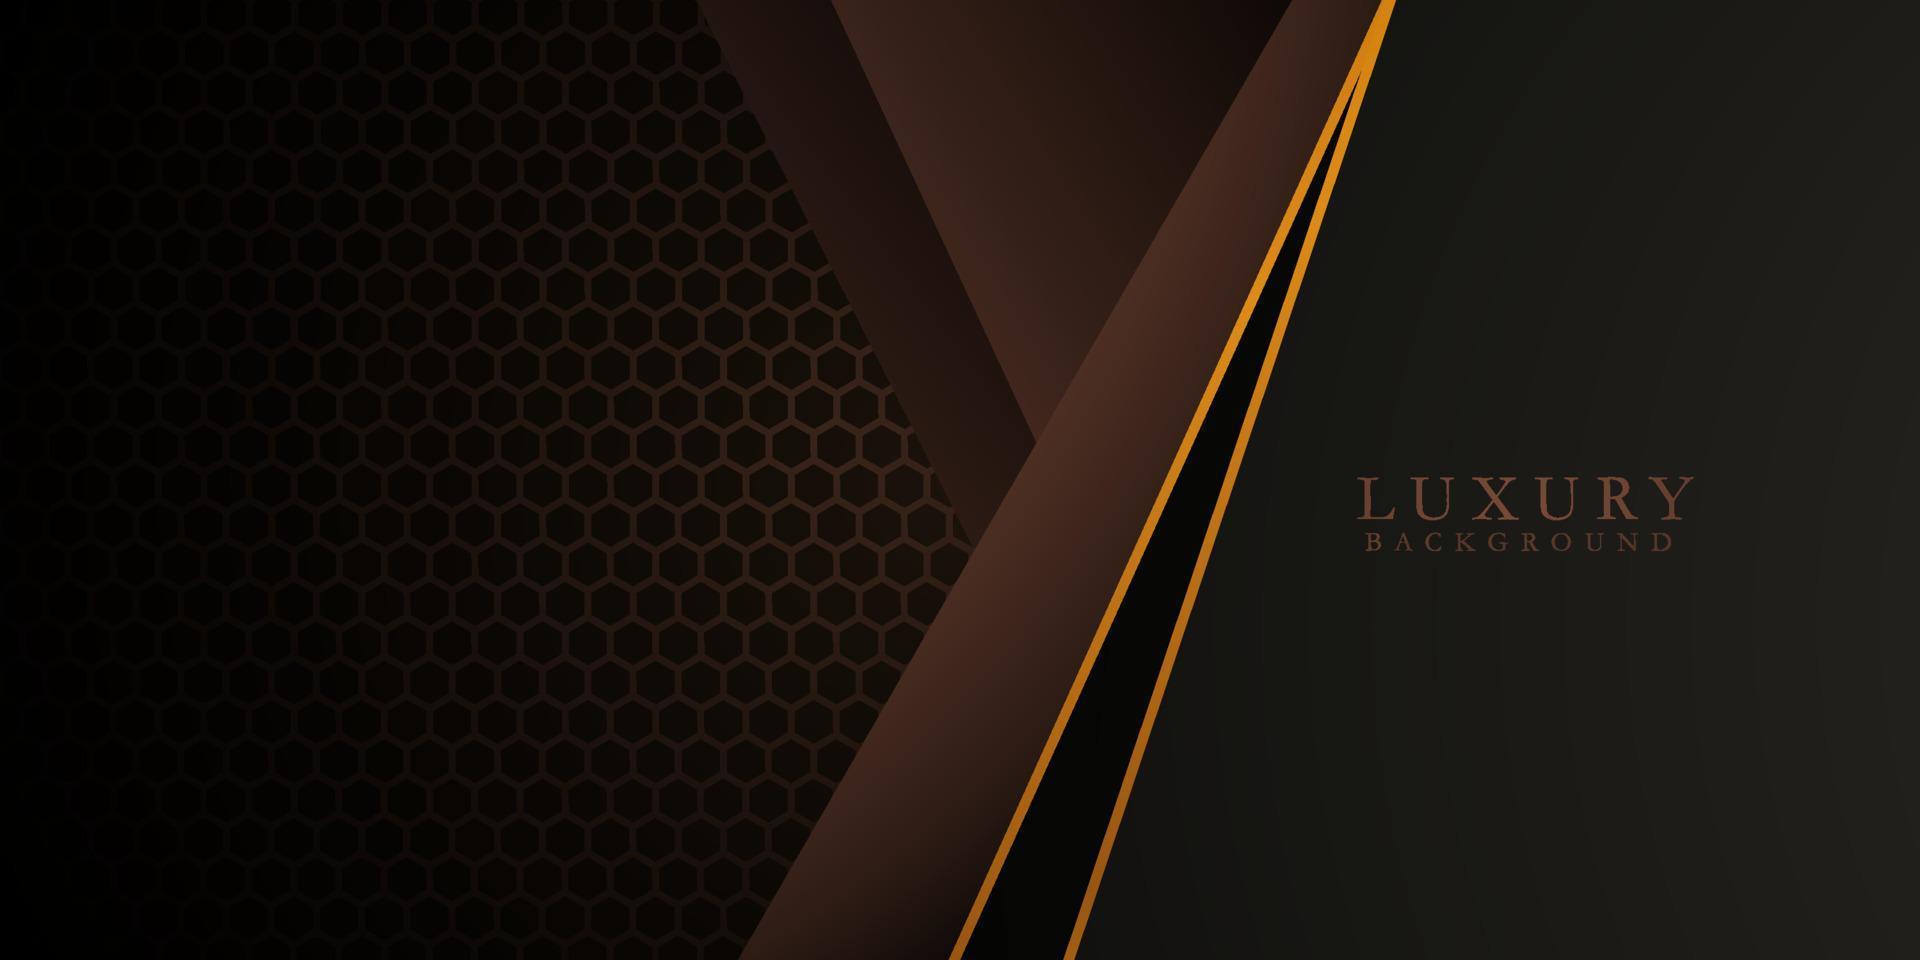 abstract dark brown background with shadows and simple lines. looks 3d with additional hexagonal patterns and gold line. suitable for posters, brochures, e-sports and others. eps10 vector